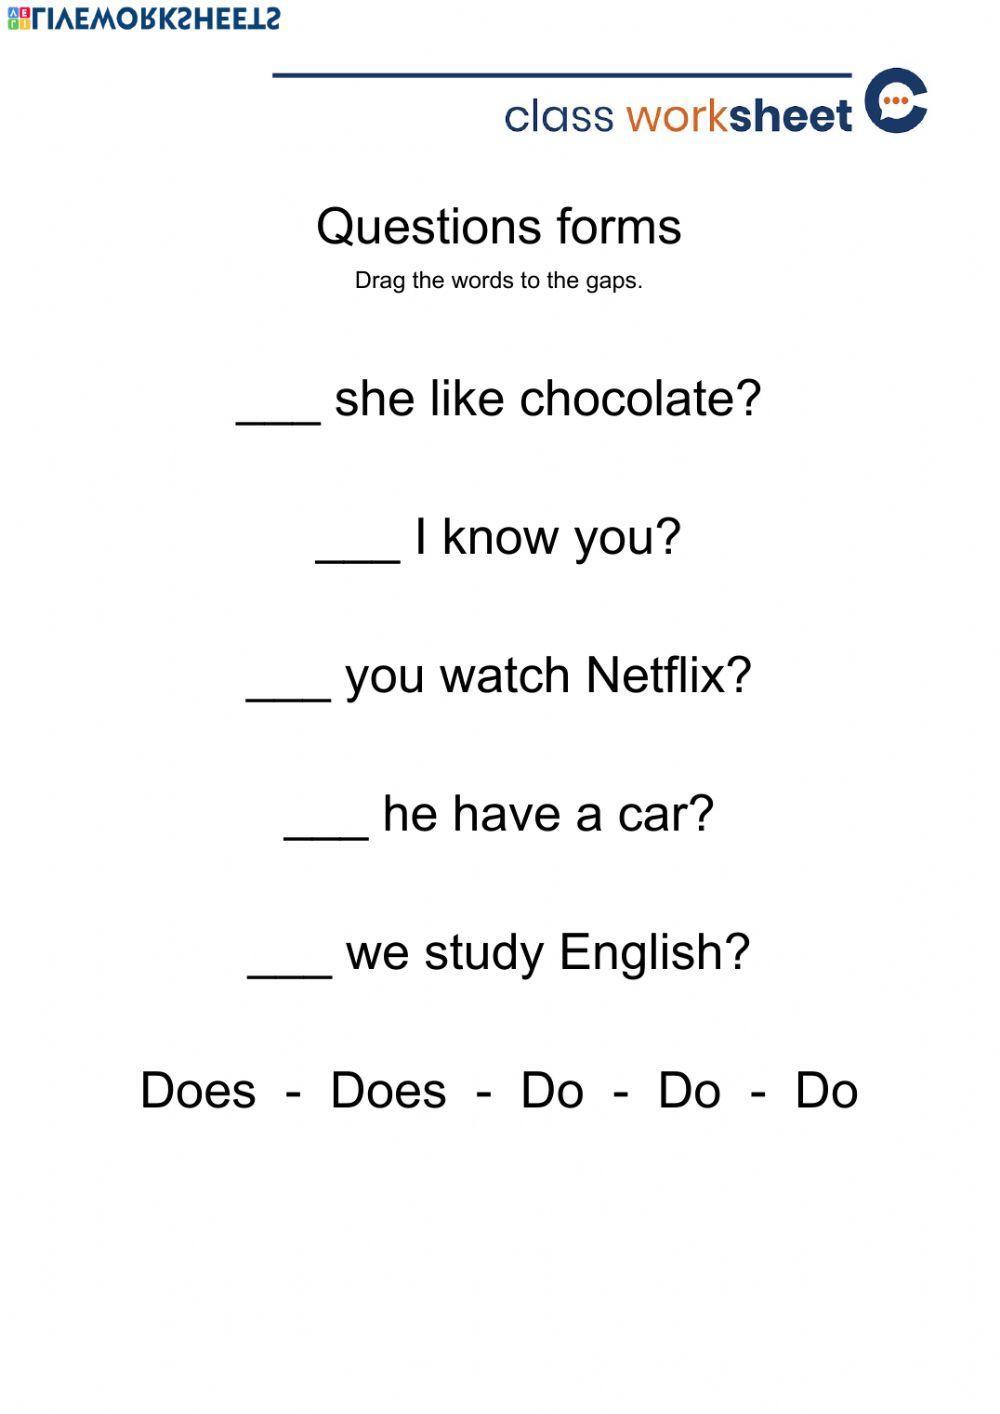 Question forms do-does